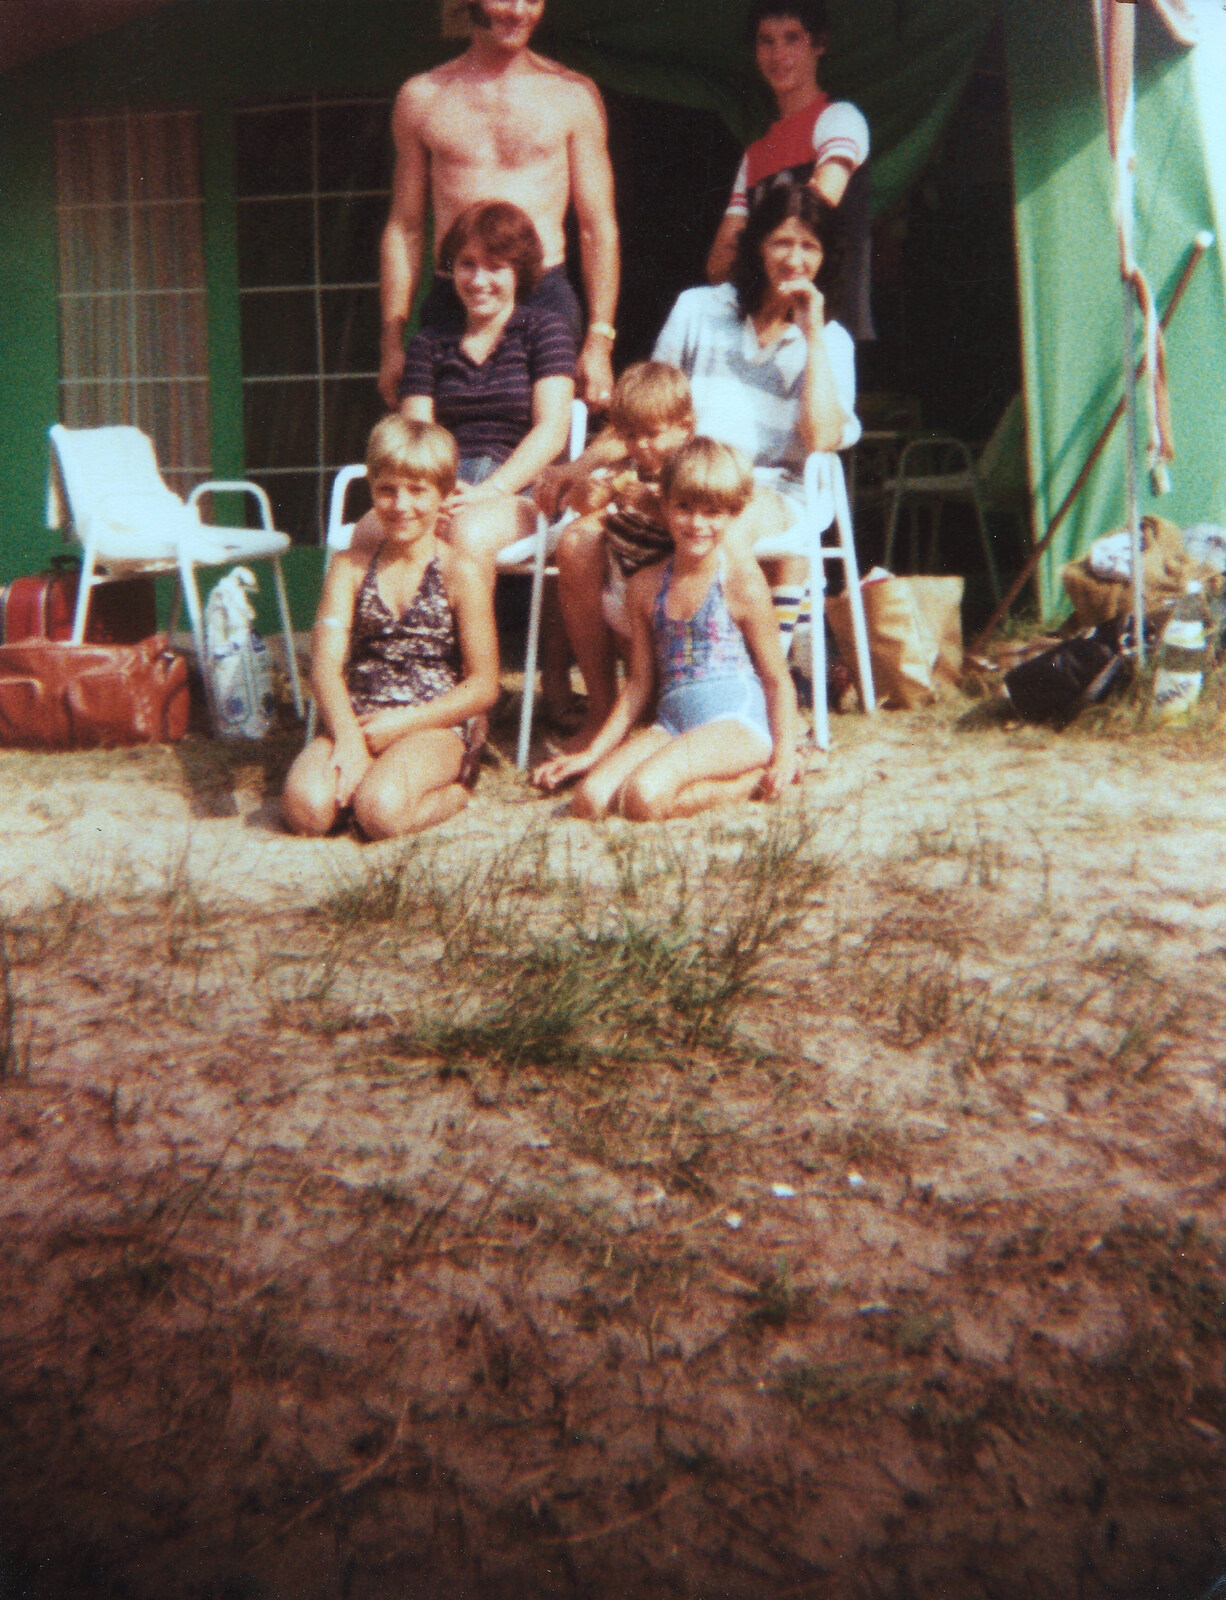 Dave and his family, next door from Camping with Sean, The Camargue, South of France, 15th July 1982